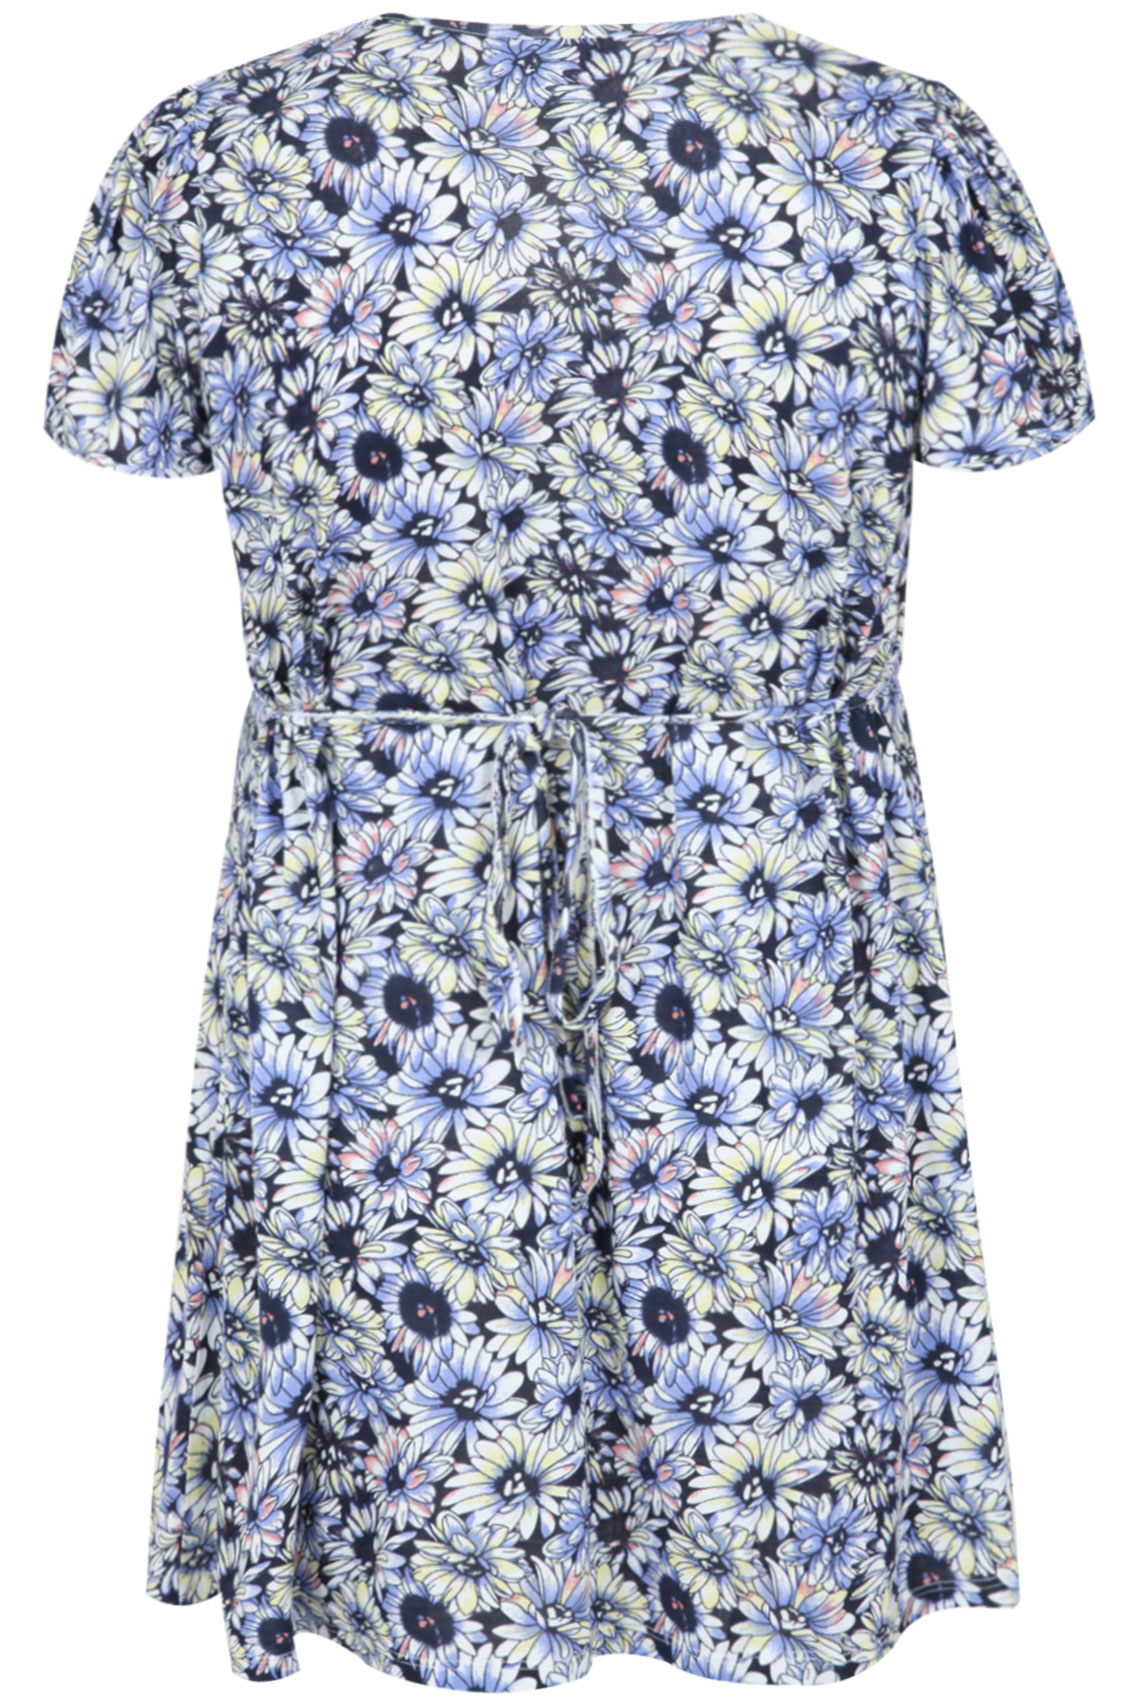 Navy Floral Print Short Sleeve Top With Keyhole Neck & Crochet Detail ...